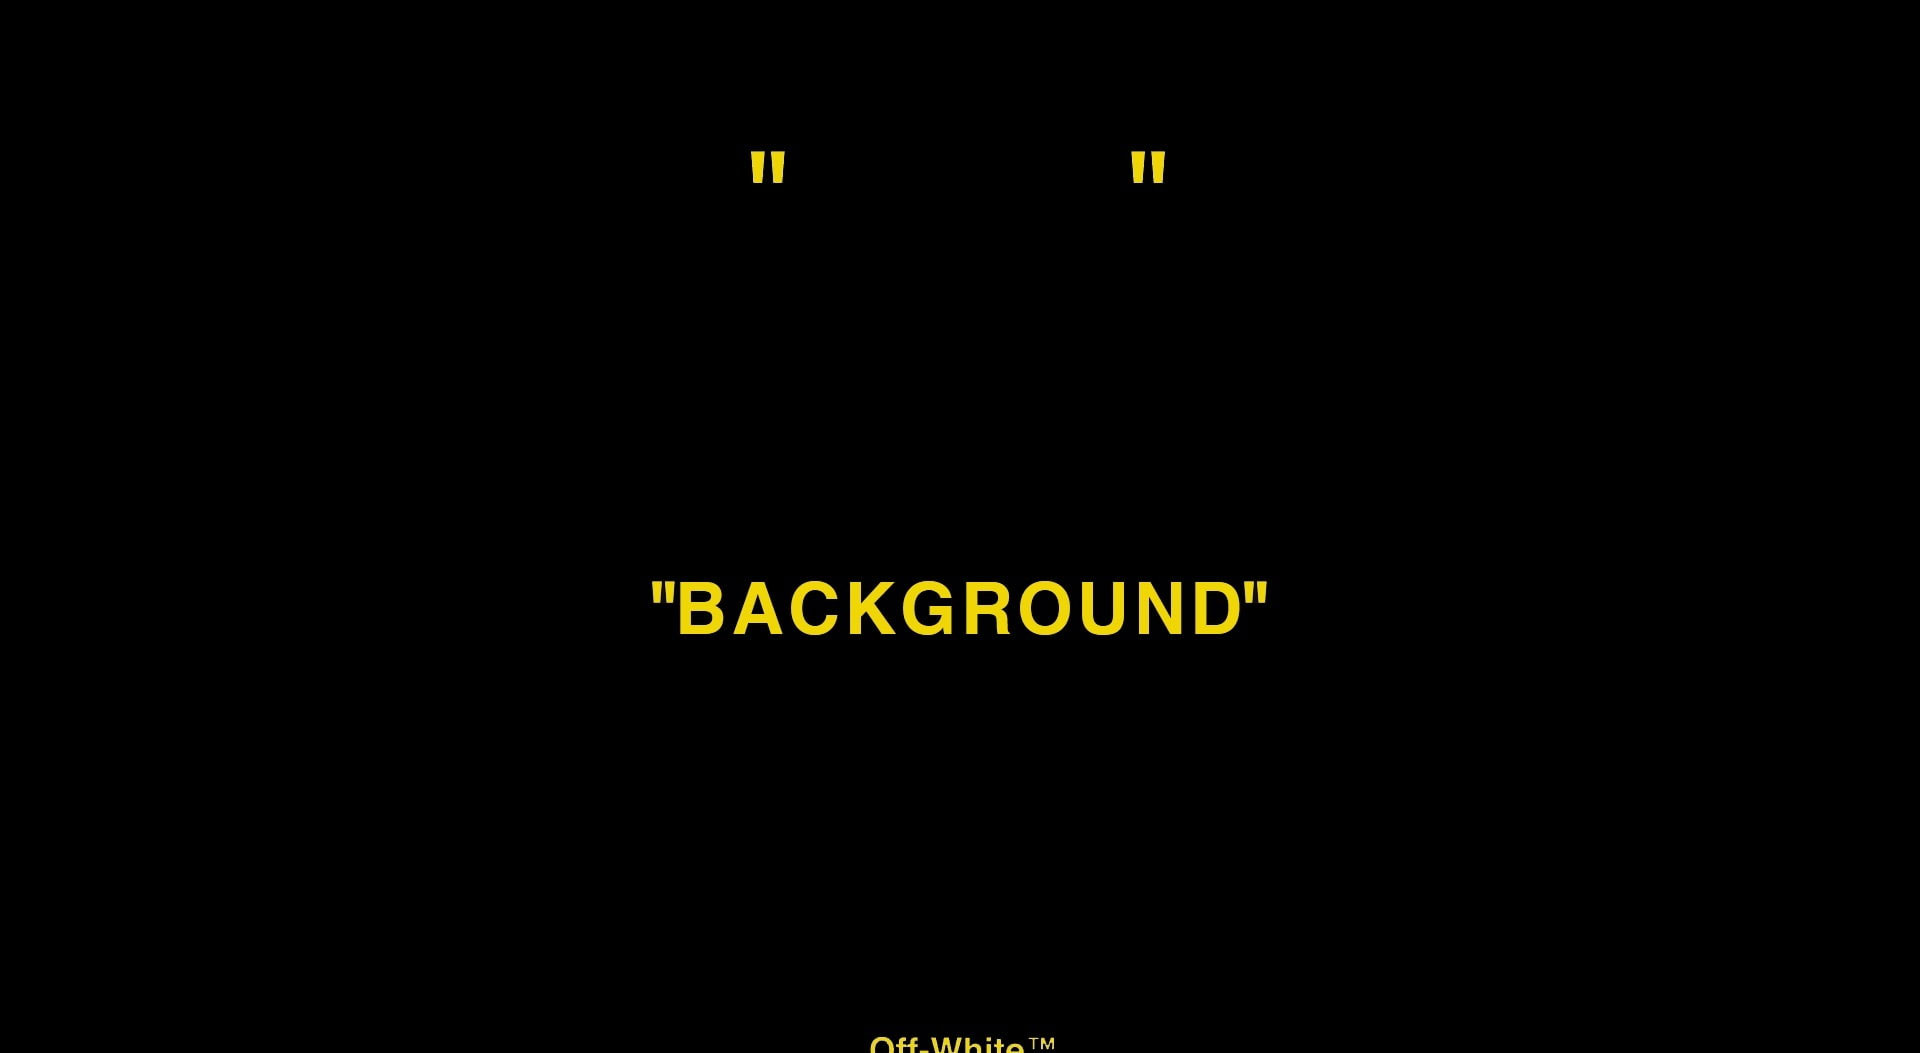 Wallpaper Off White Background, Yellow Text On Black